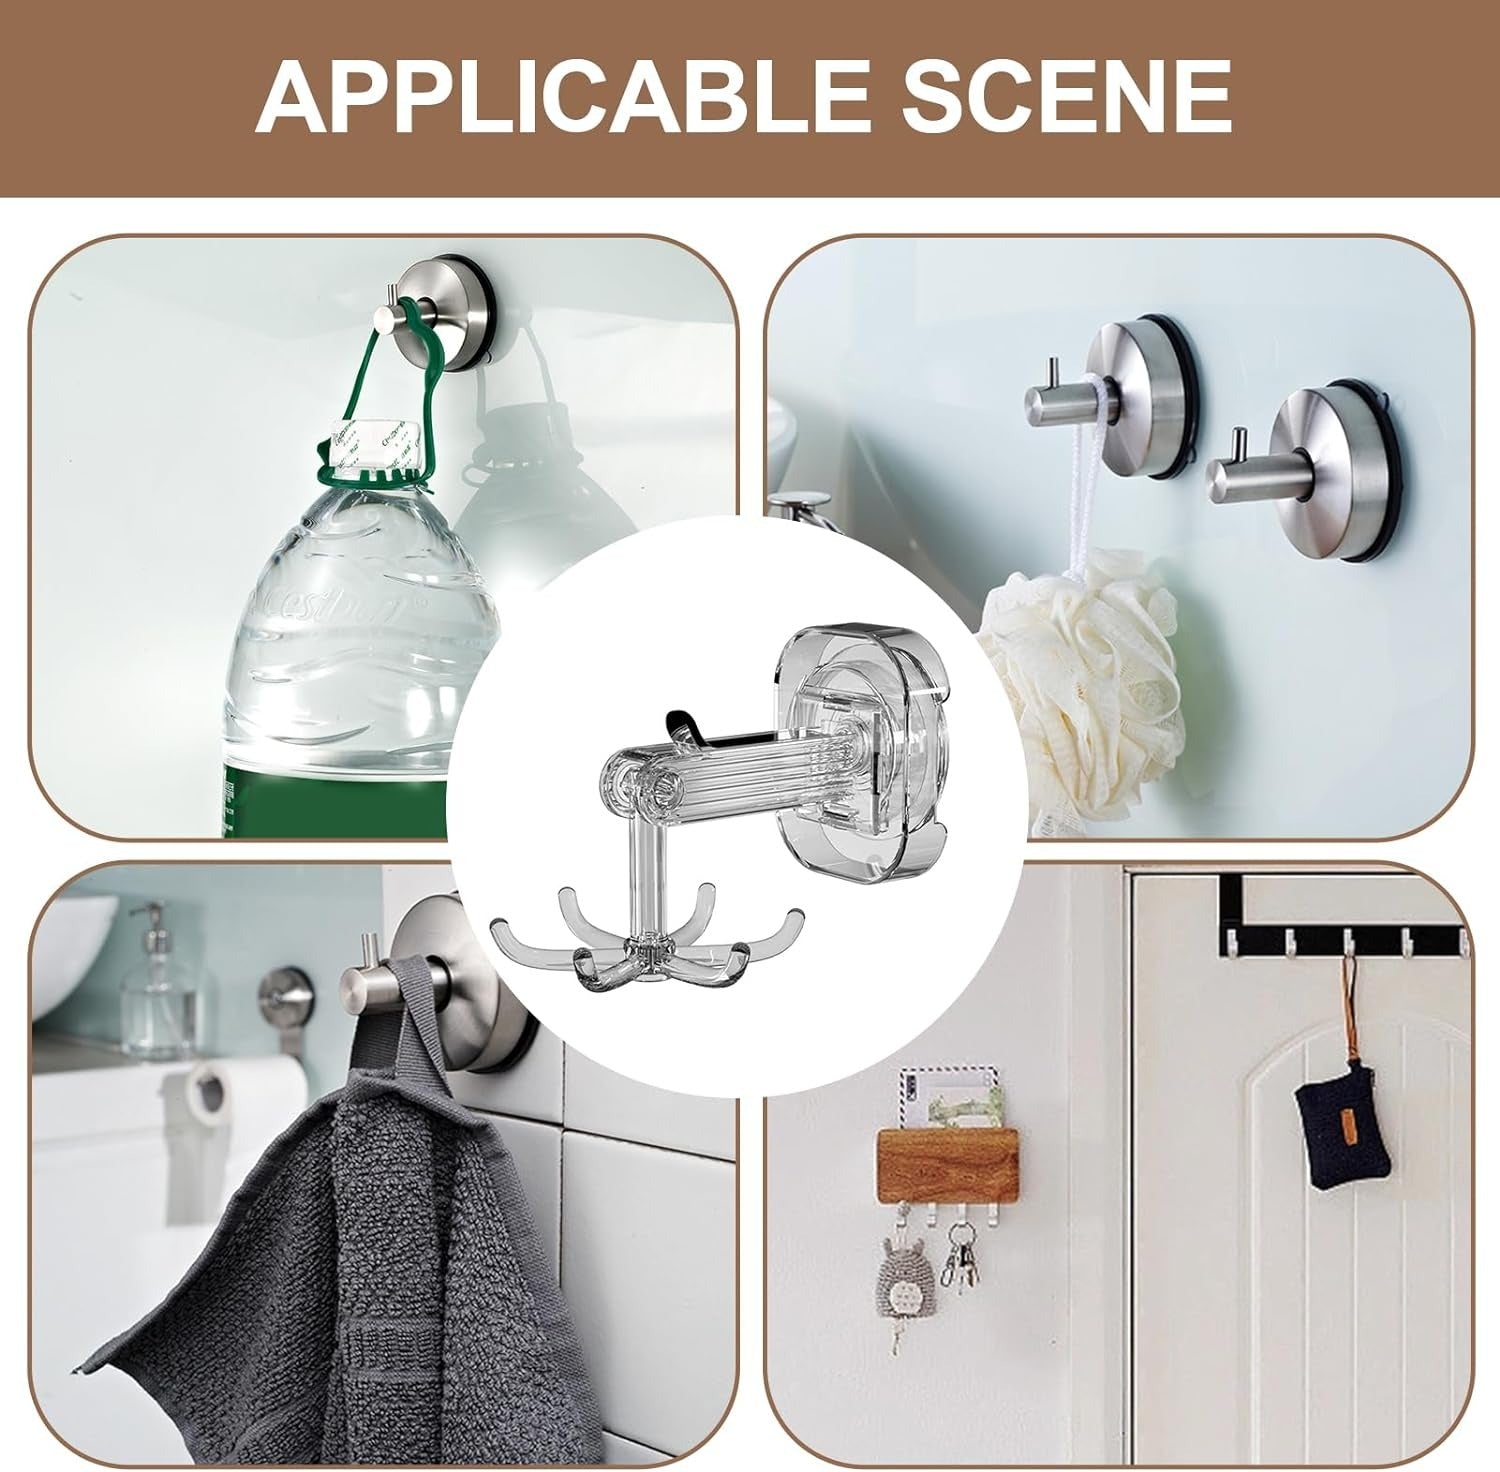 360° Rotatable Suction Cup Hook applicable anywhere in home to organize